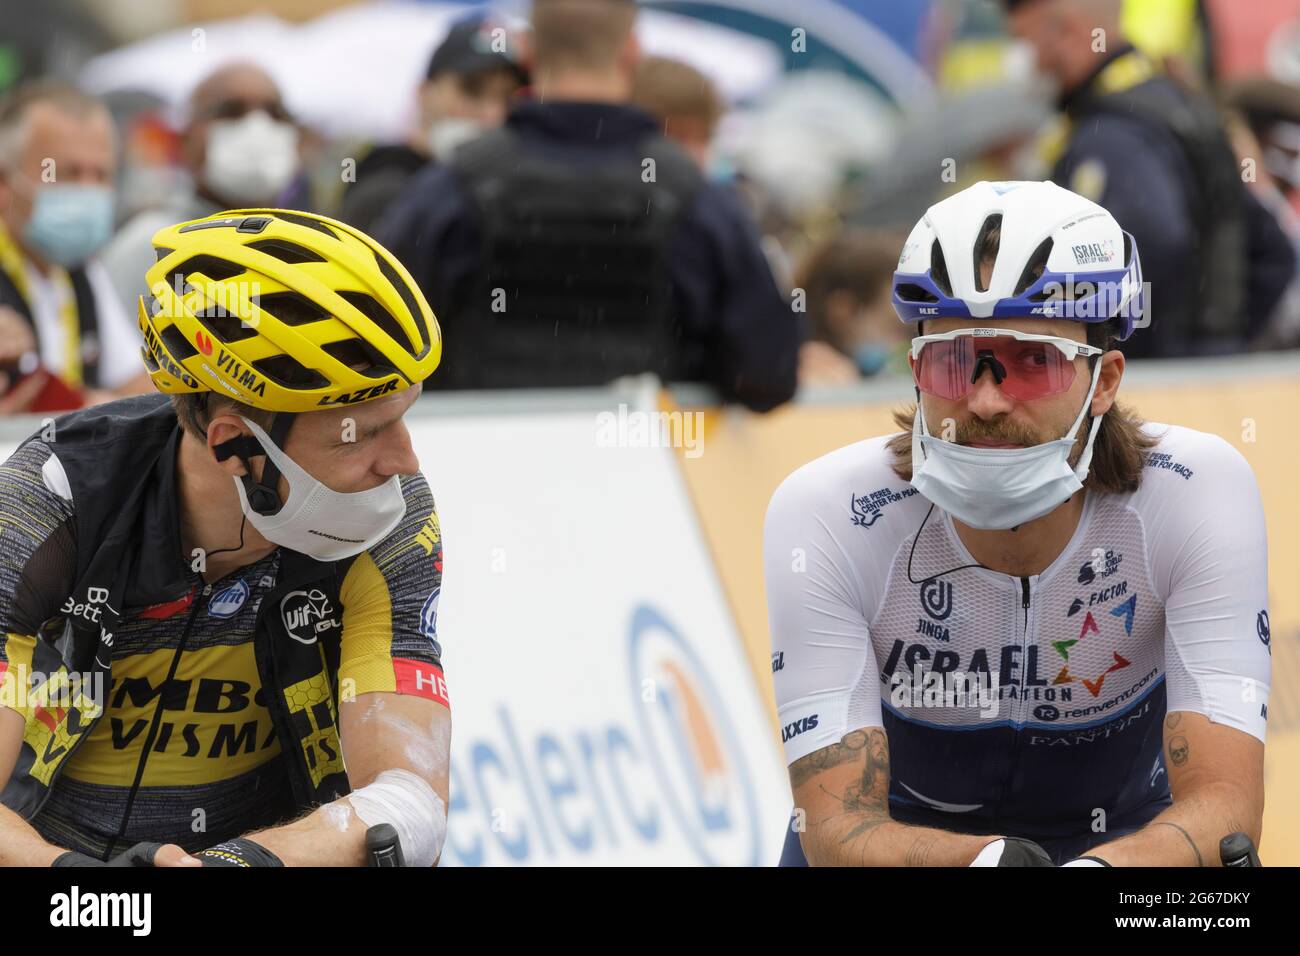 Oyonnax, France. 03 July 2021. Tony Martin and Rick Zabel at the start of the 8th stage of the Tour de France in Oyonnax, France. Julian Elliott News Photography Credit: Julian Elliott/Alamy Live News Stock Photo